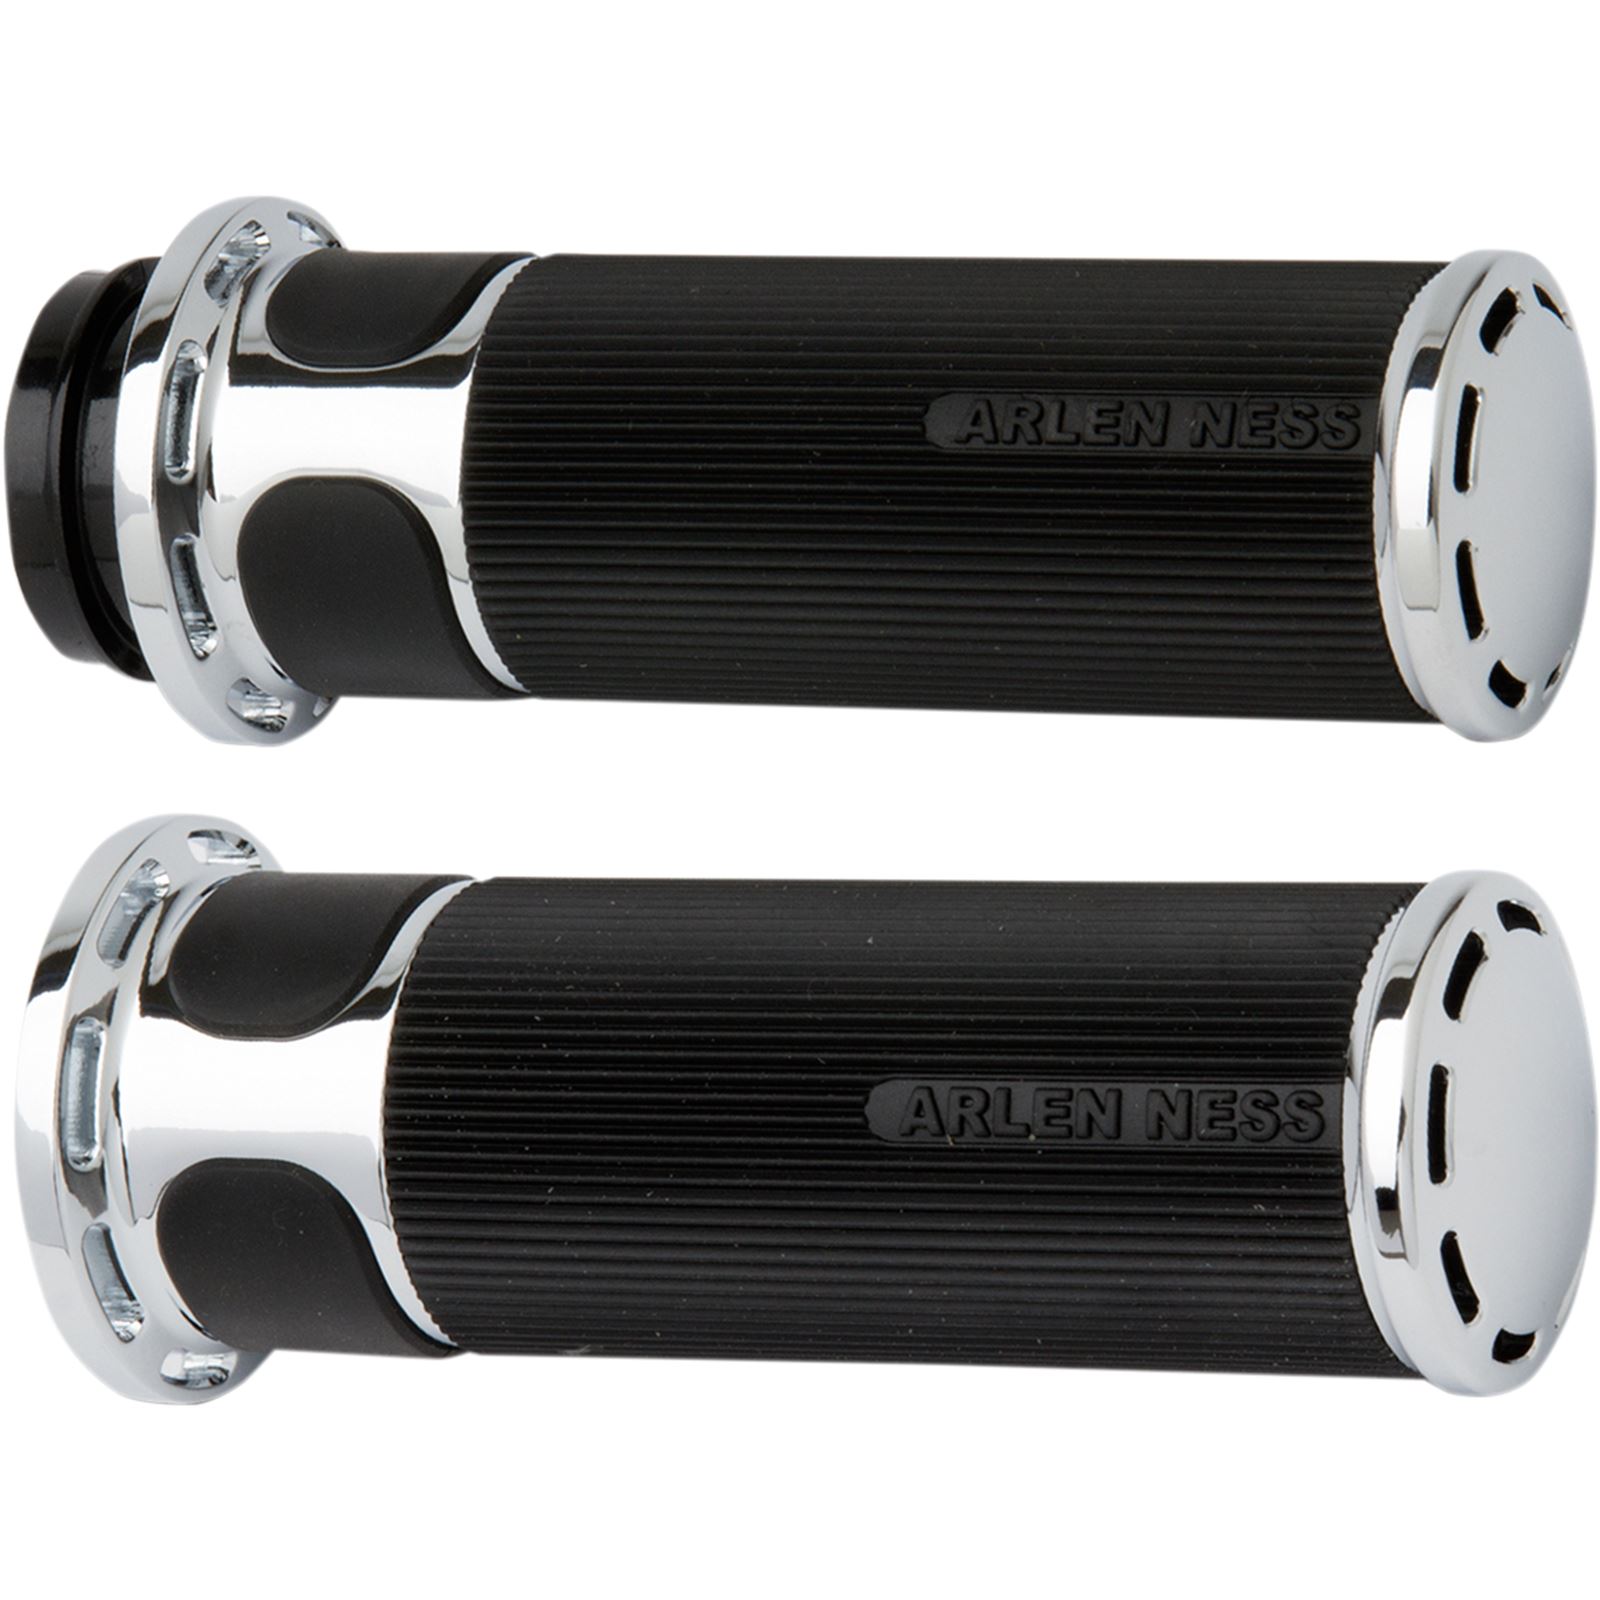 Arlen Ness Chrome Slot Track Grips for Cable